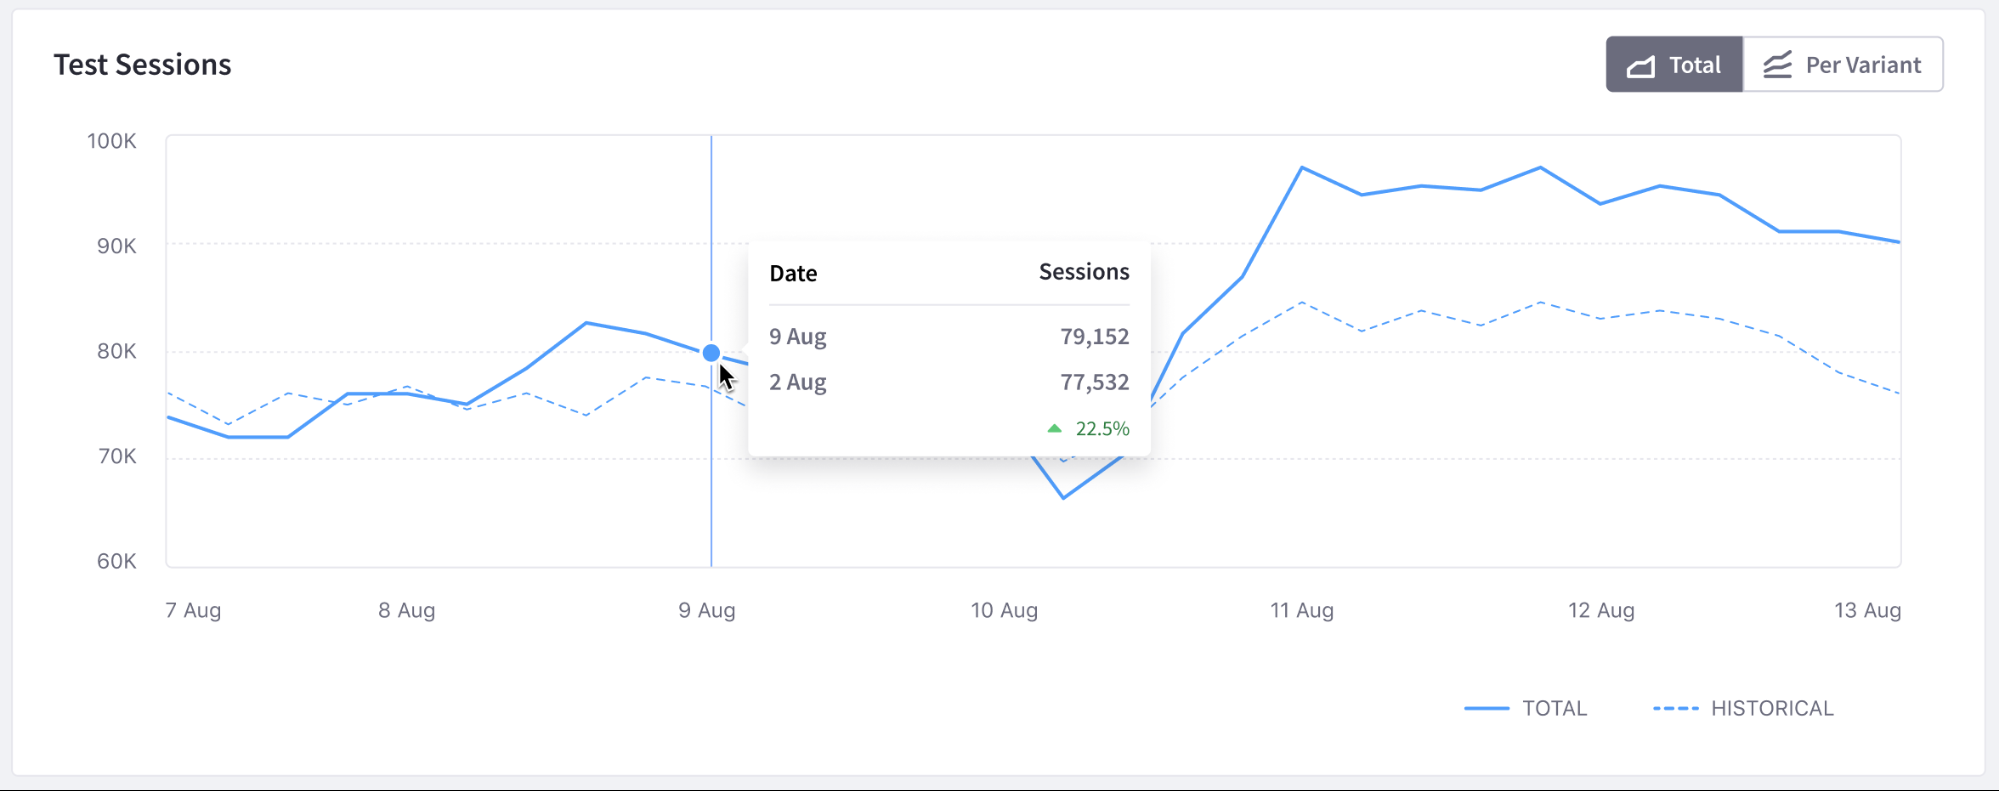 The Test Sessions panel shows sessions viewing your test impressions per day over time.